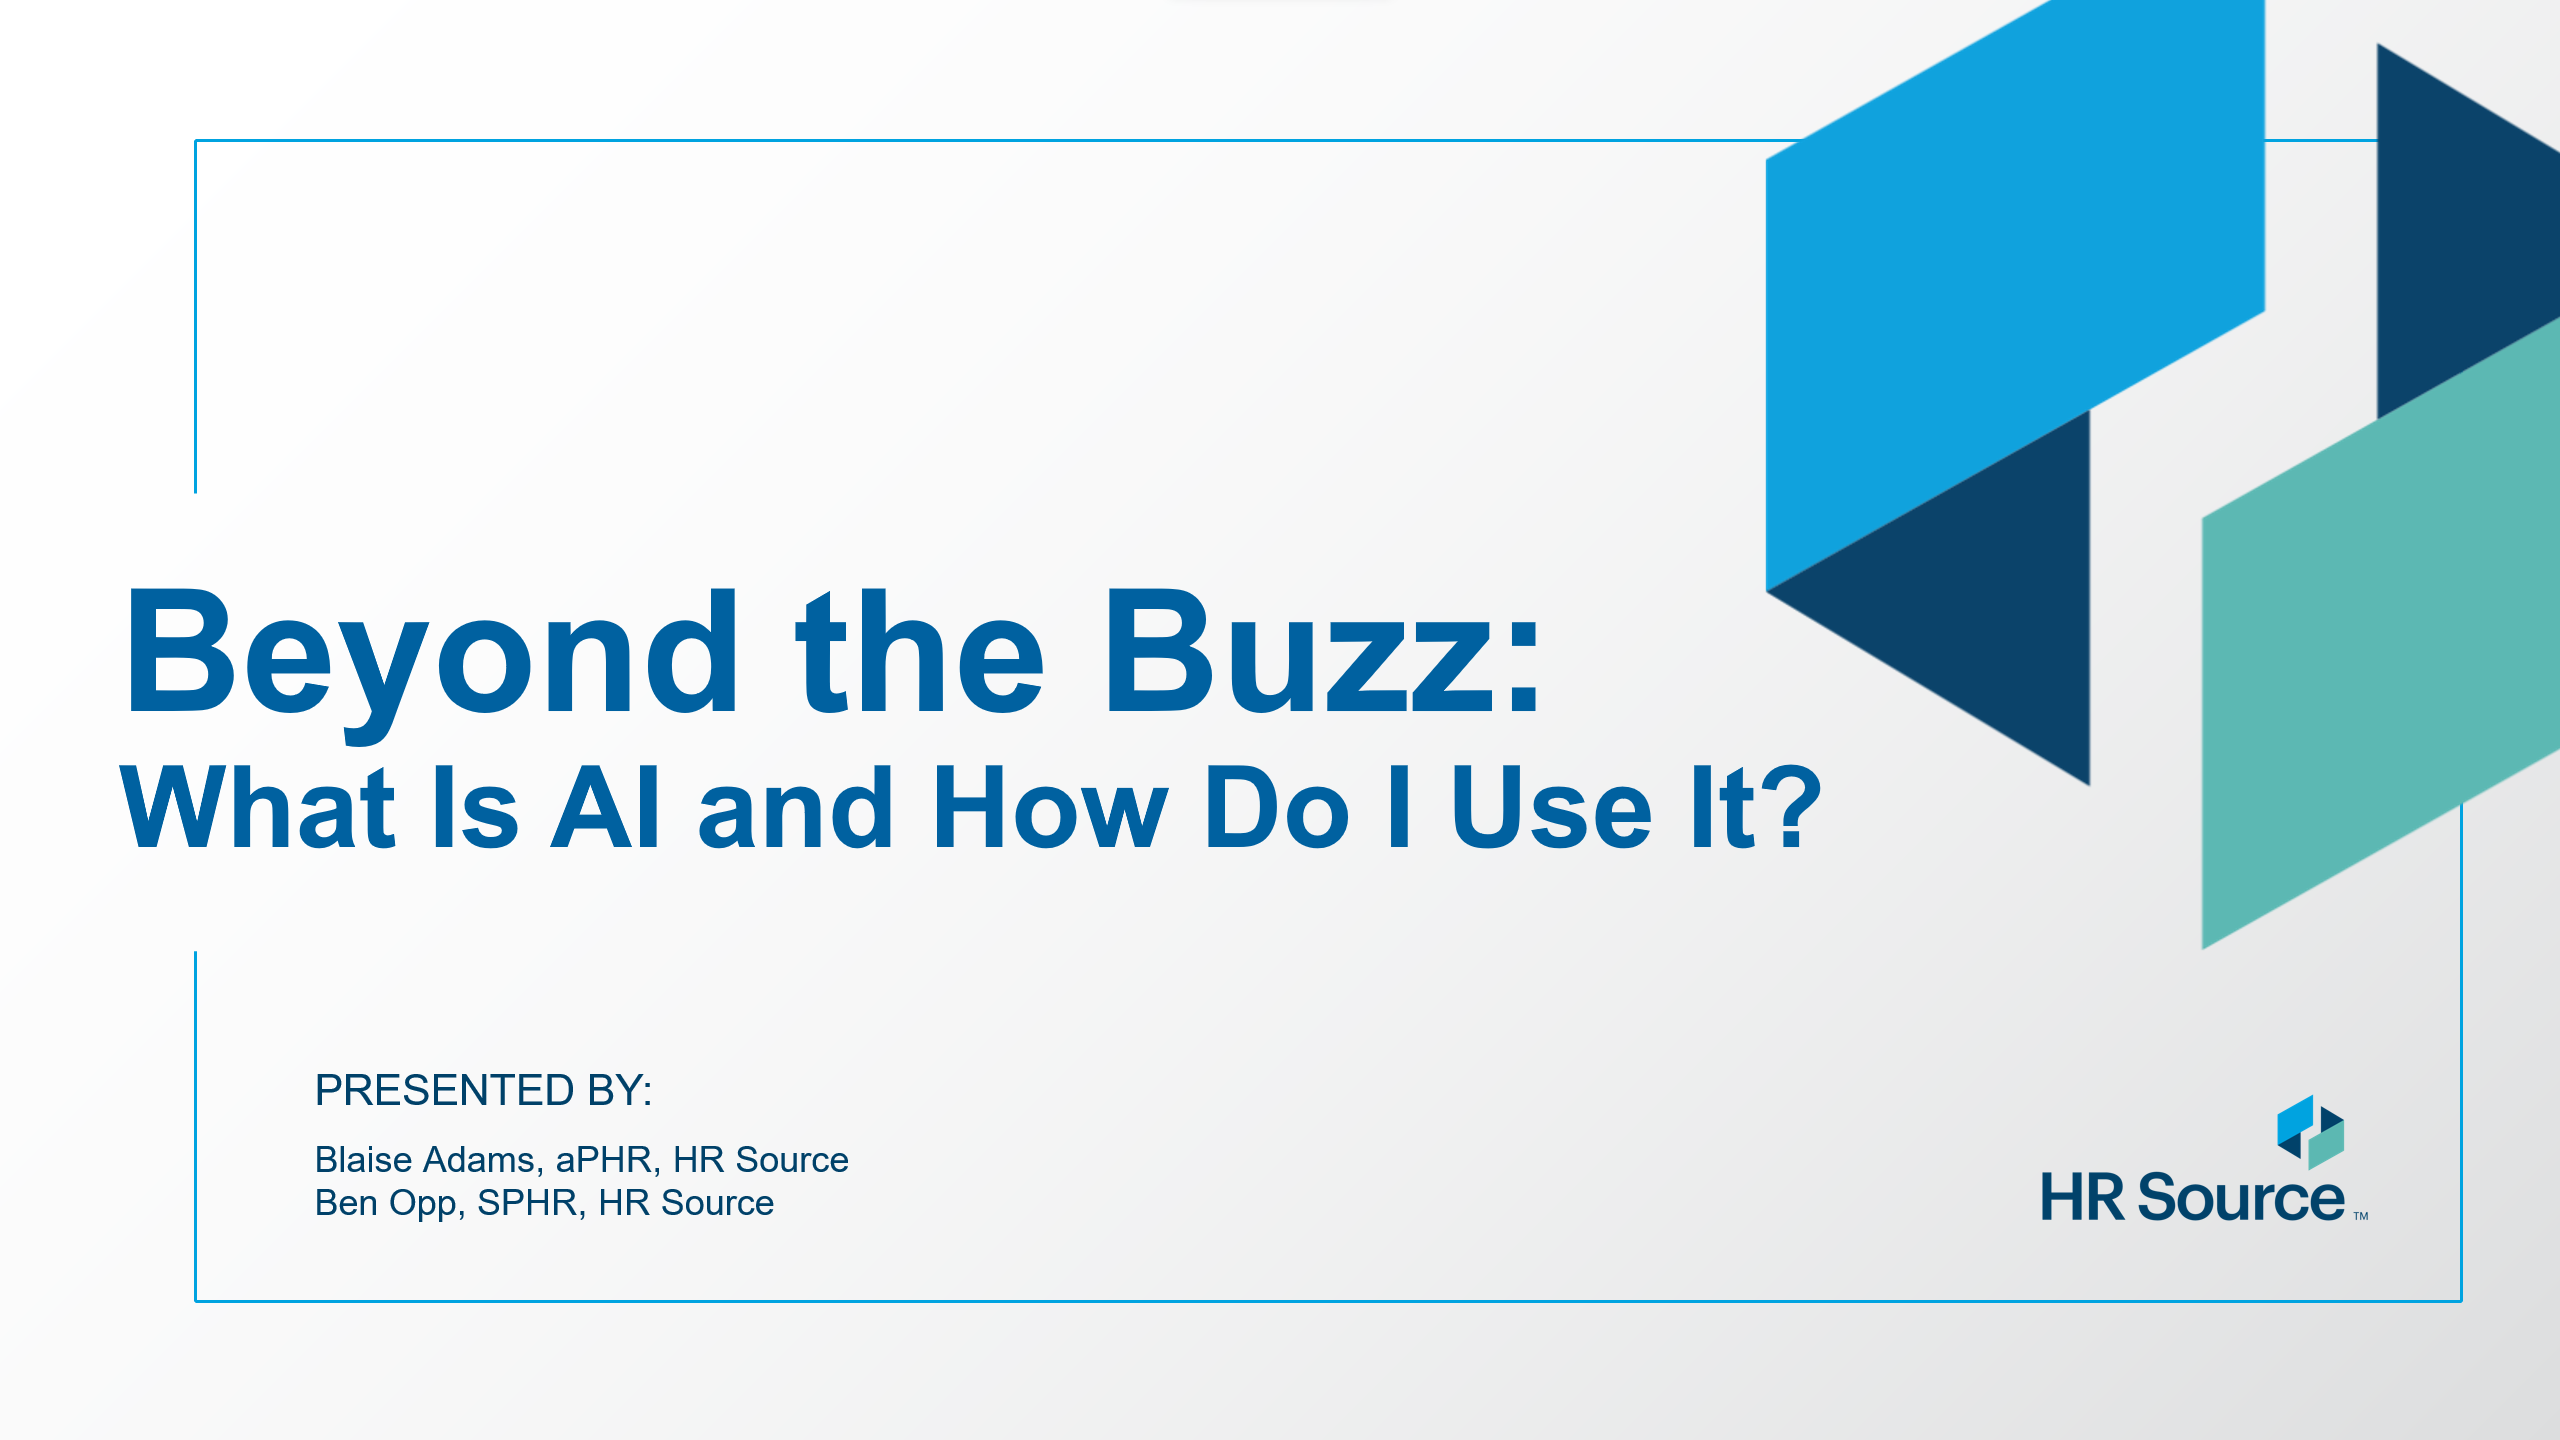 Beyond the Buzz: What Is AI and How Do I Use It?